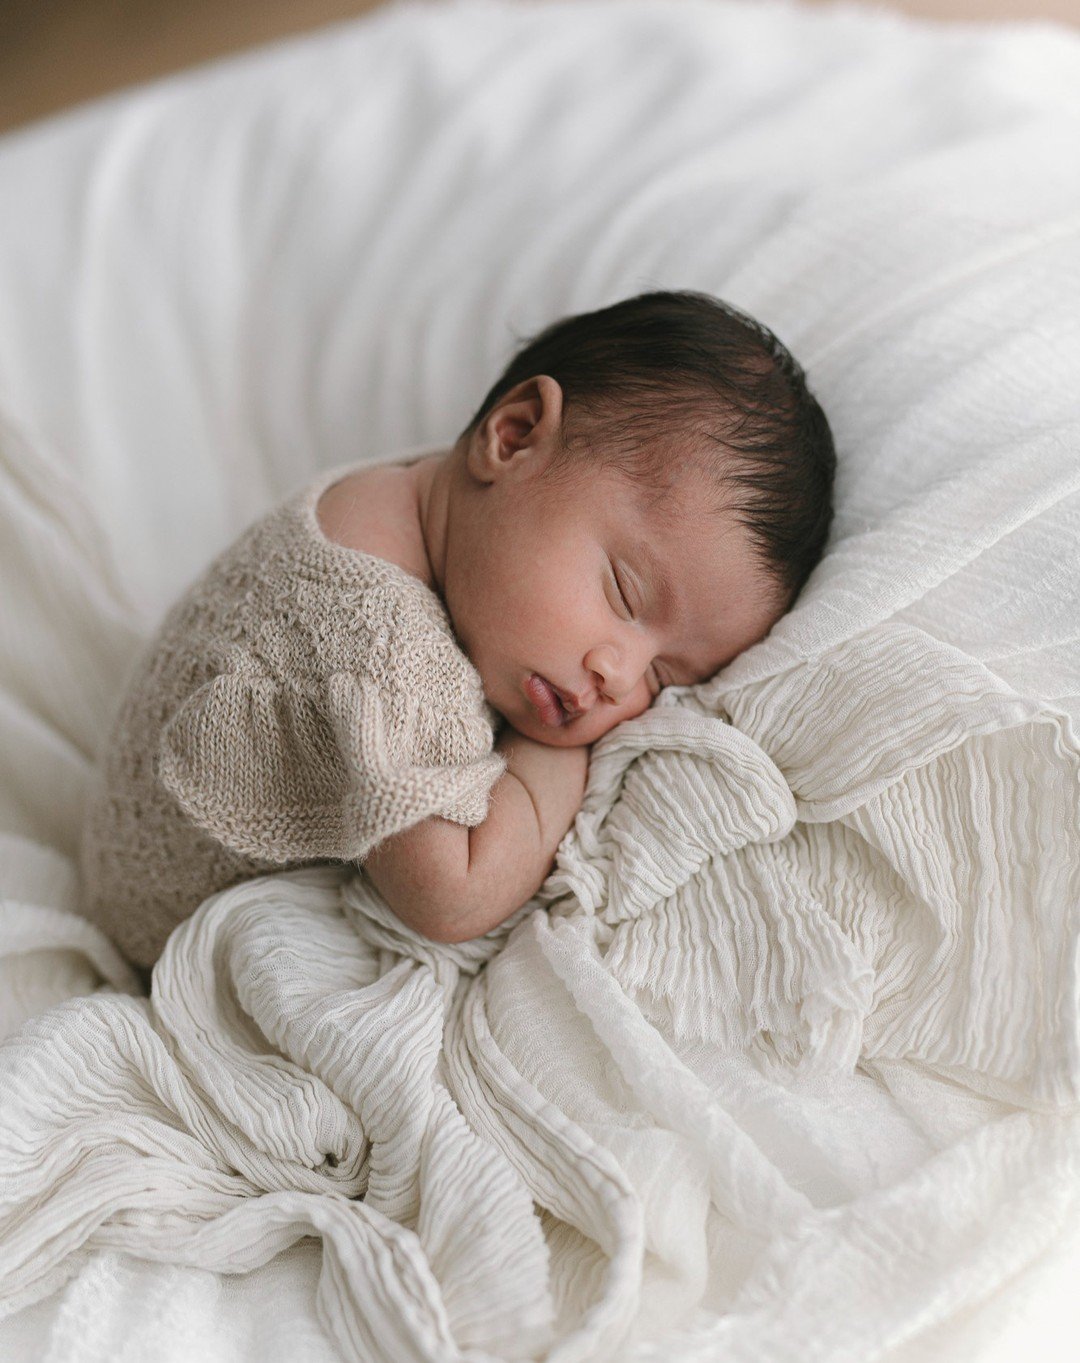 Simply your newborn and my favourite time of the day &hearts;️&hearts;️&hearts;️​​​​​​​​​

Melbourne Maternity &amp; Newborn Photographer / Family-centred sessions / Mothers &amp; Baby Closet / South Morang Studio

www.thefitzroys.com
@thefitzroys

#